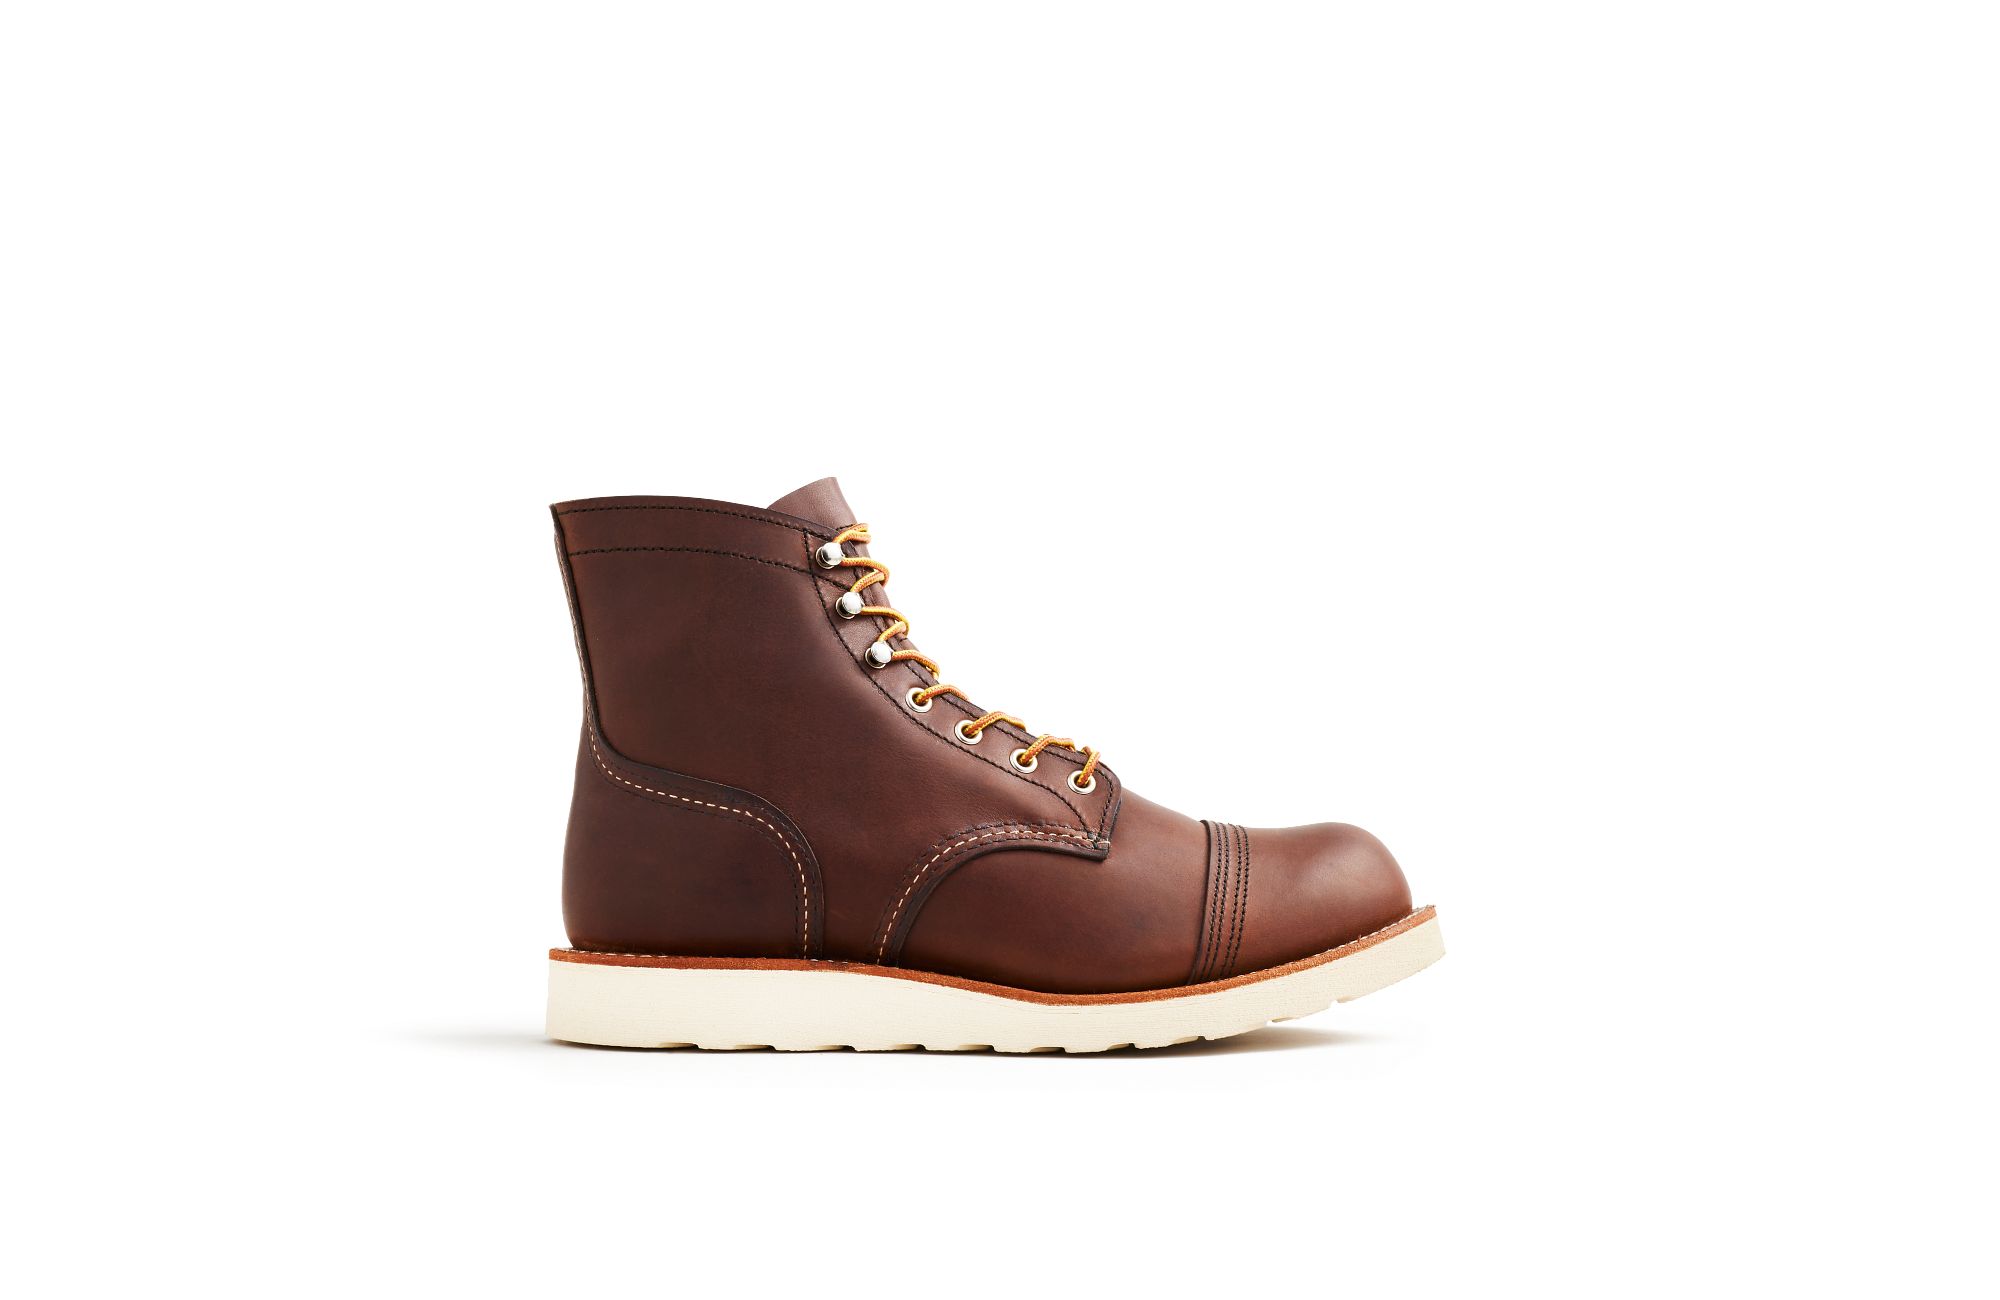 Iron Ranger Traction Tred | Red Wing